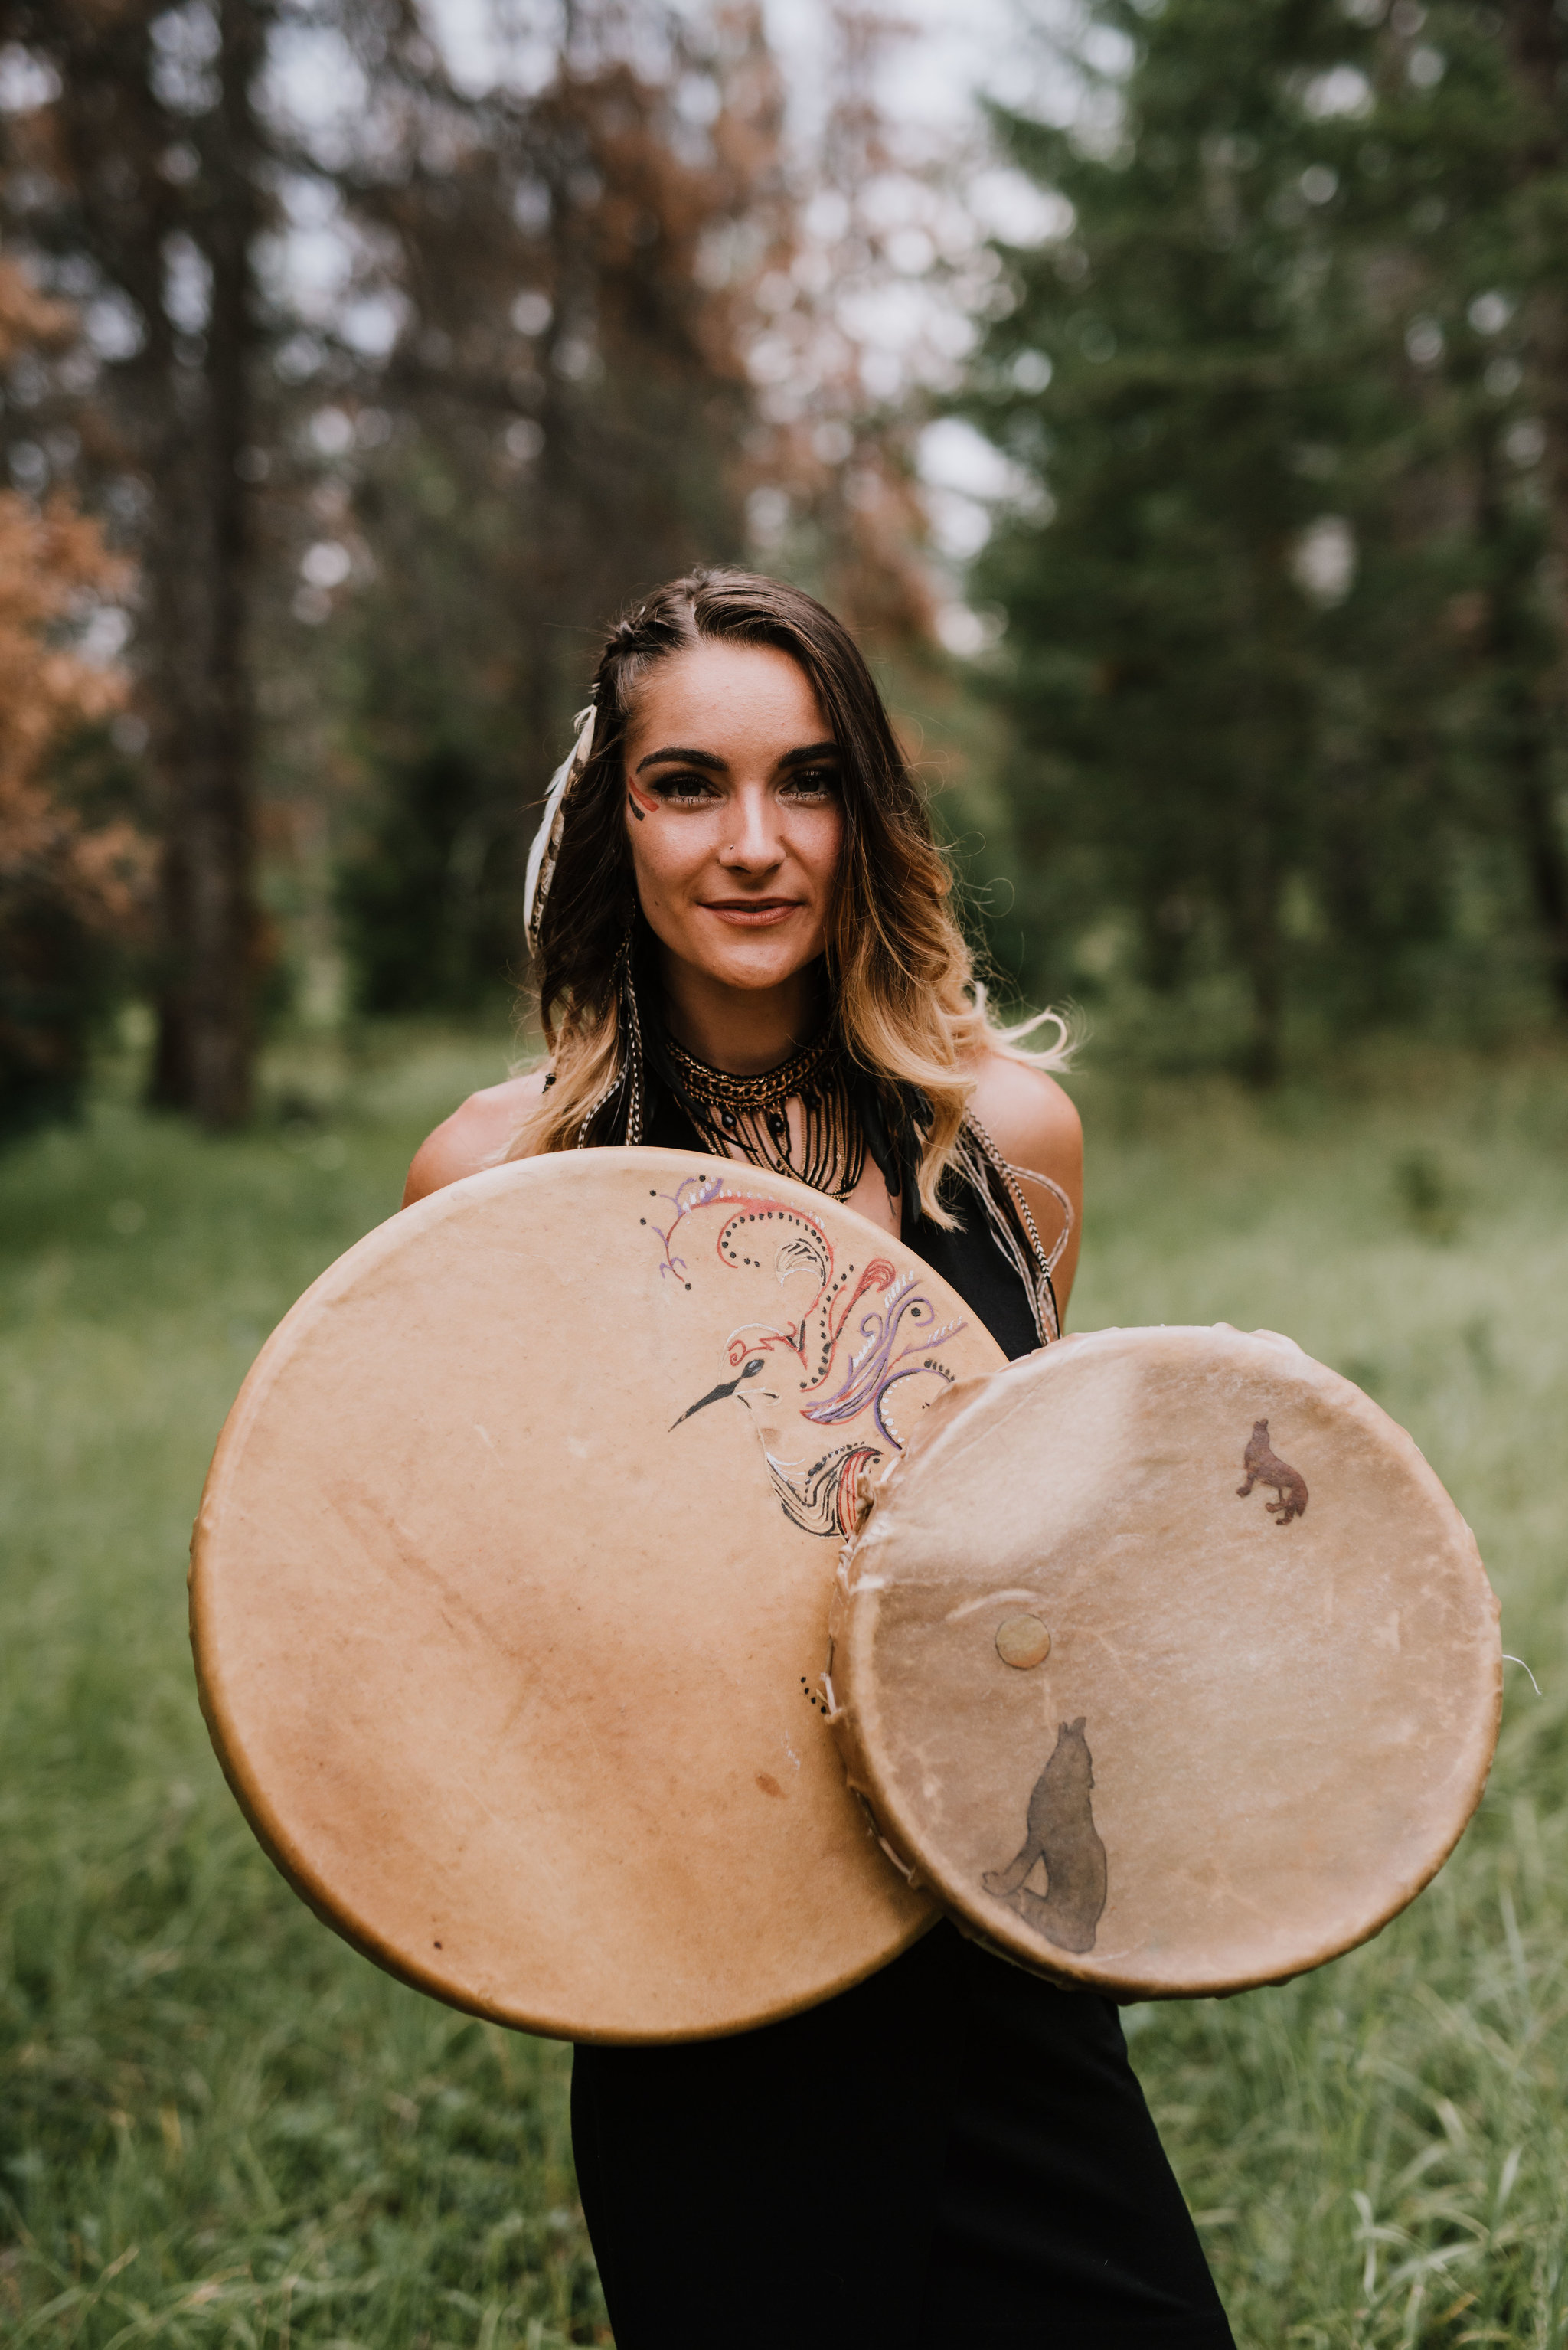 mackenzie brown holding her drums in a forest